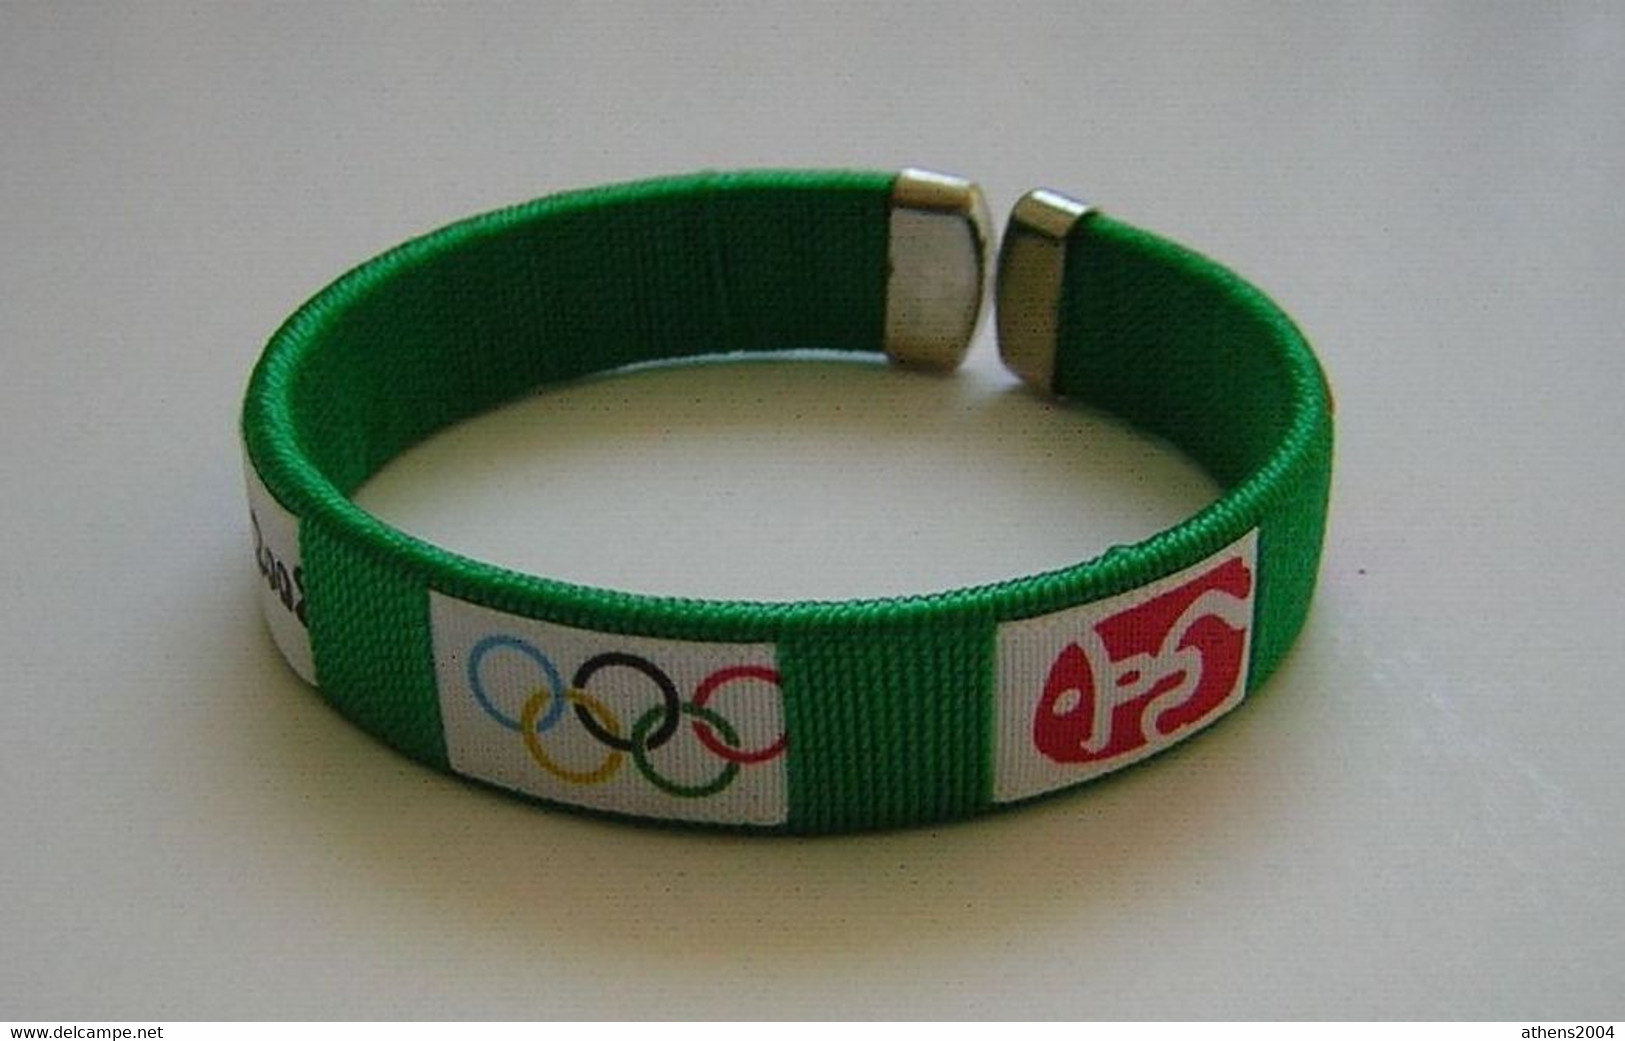 Beijing 2008 Olympic  Games - Olympic Bracelet #4 - Apparel, Souvenirs & Other